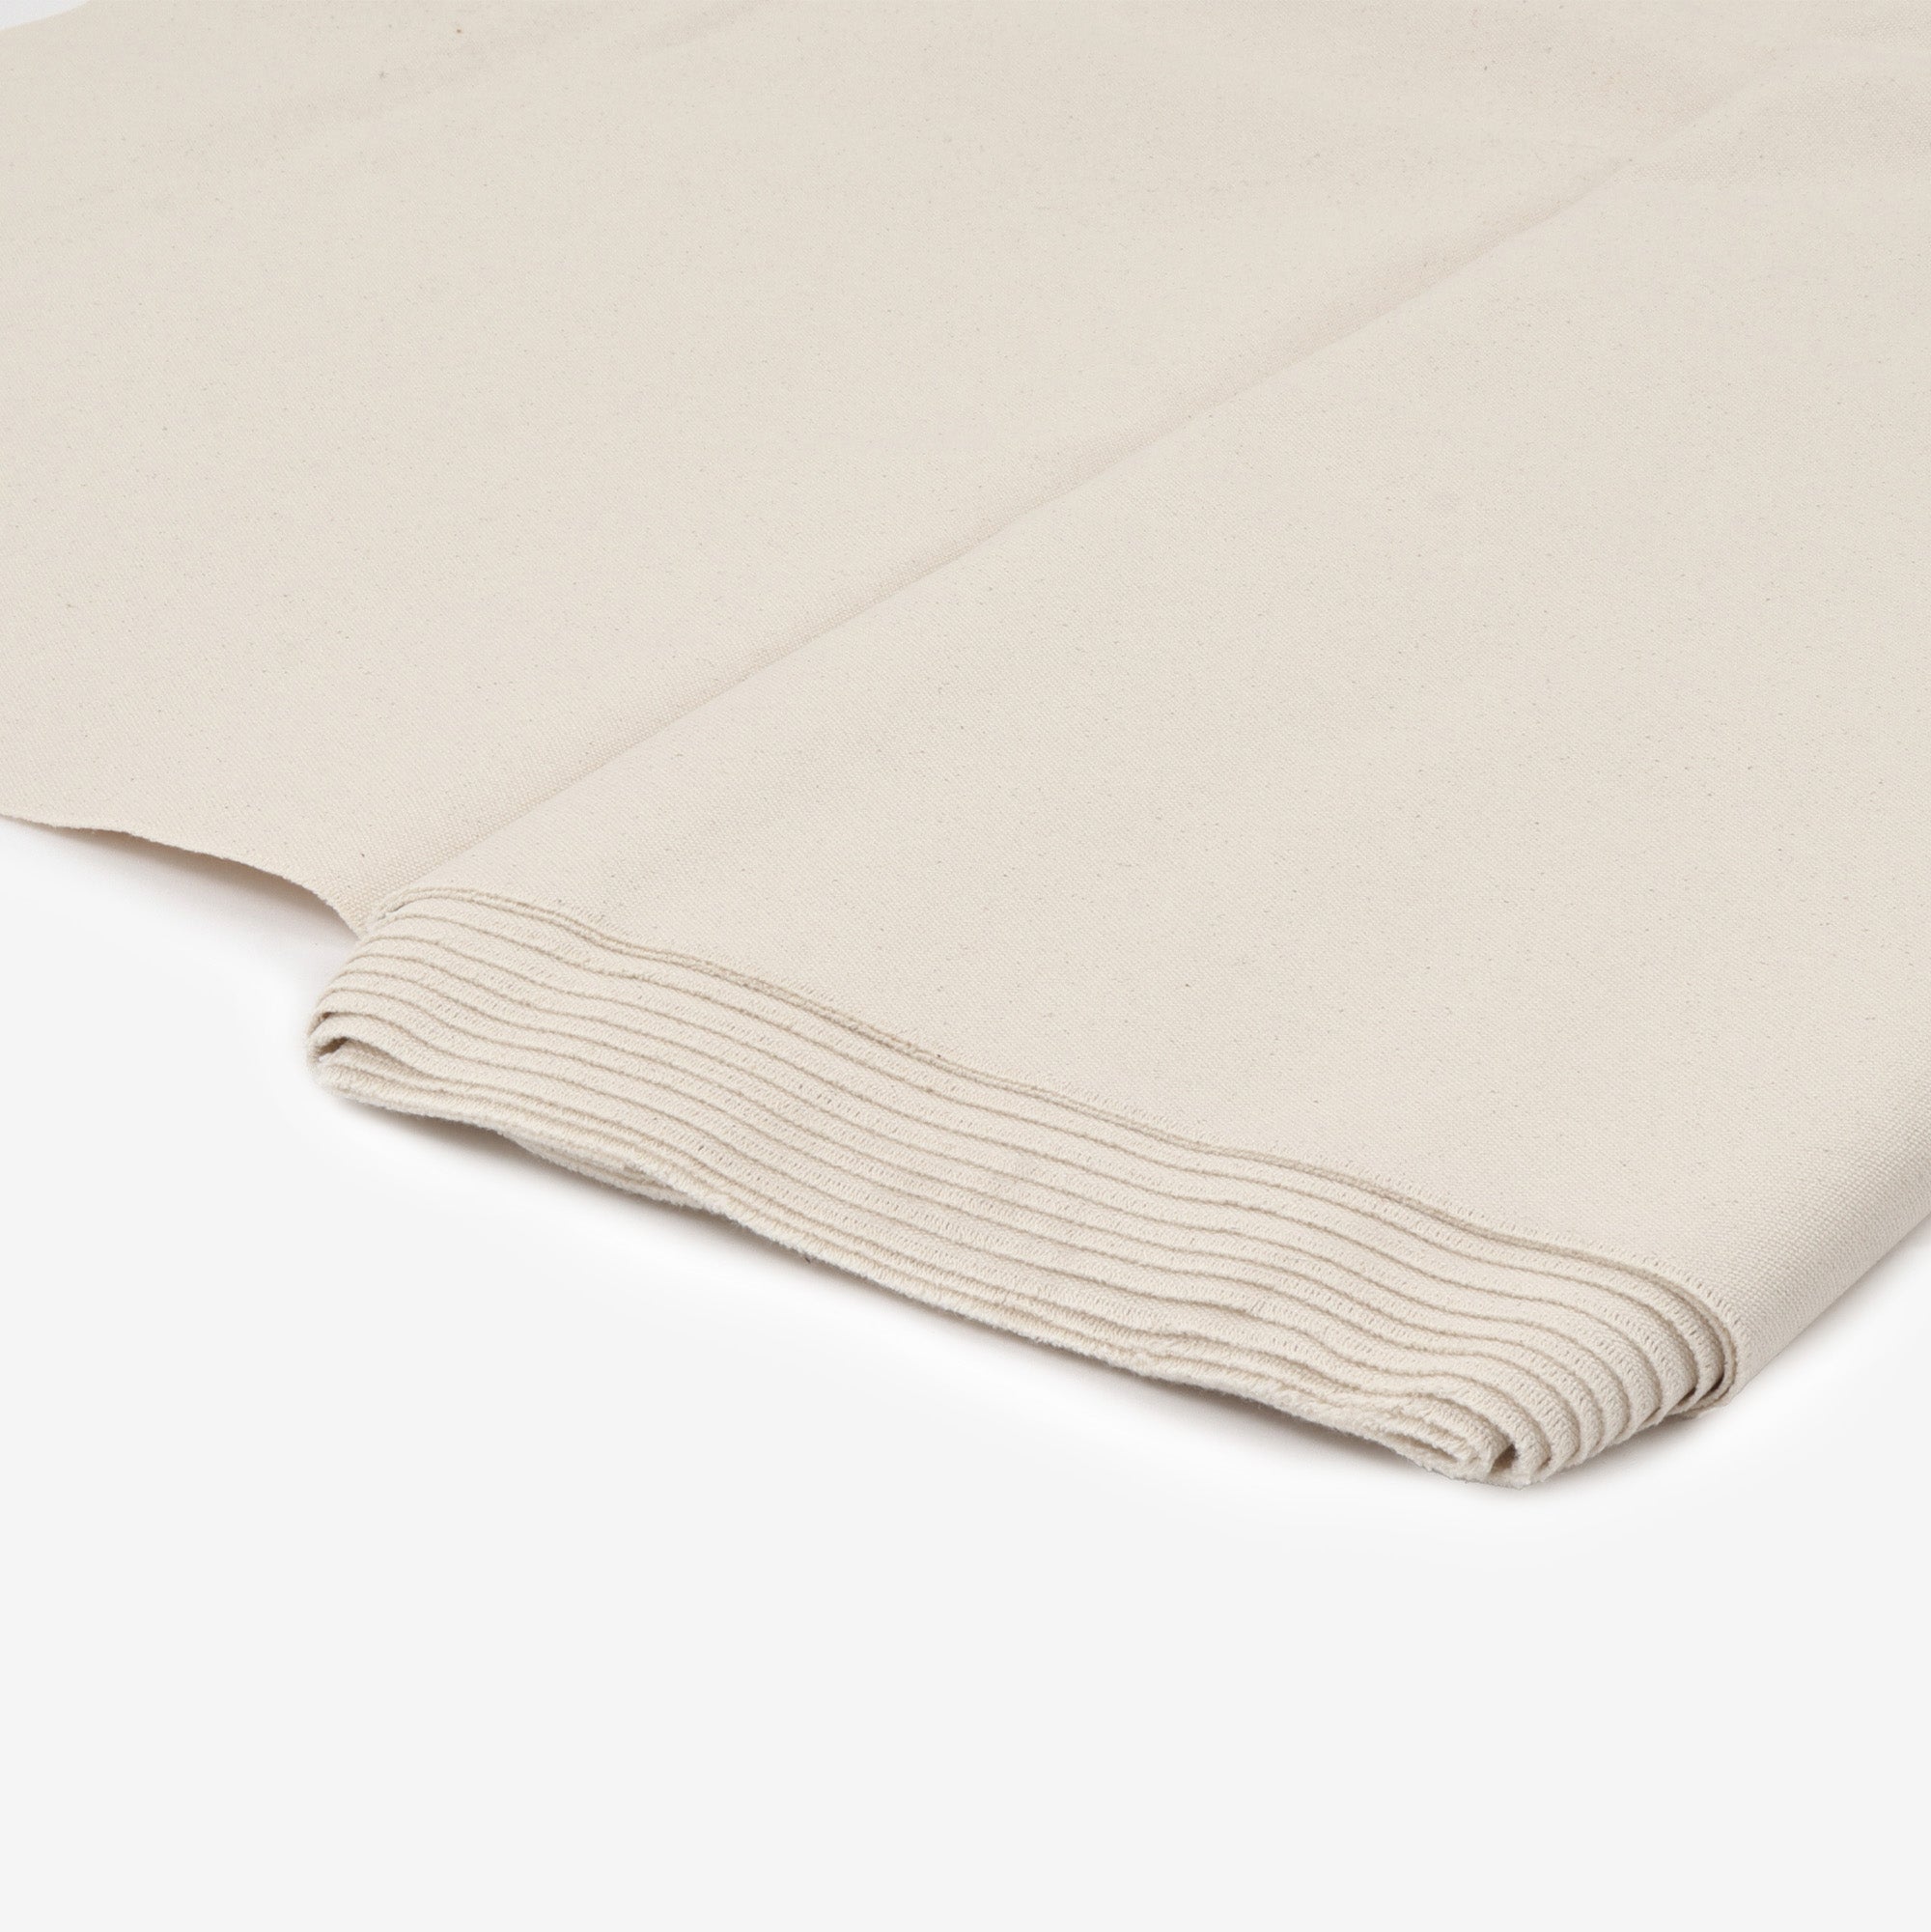 18oz Natural Cotton Canvas (By the Yard)